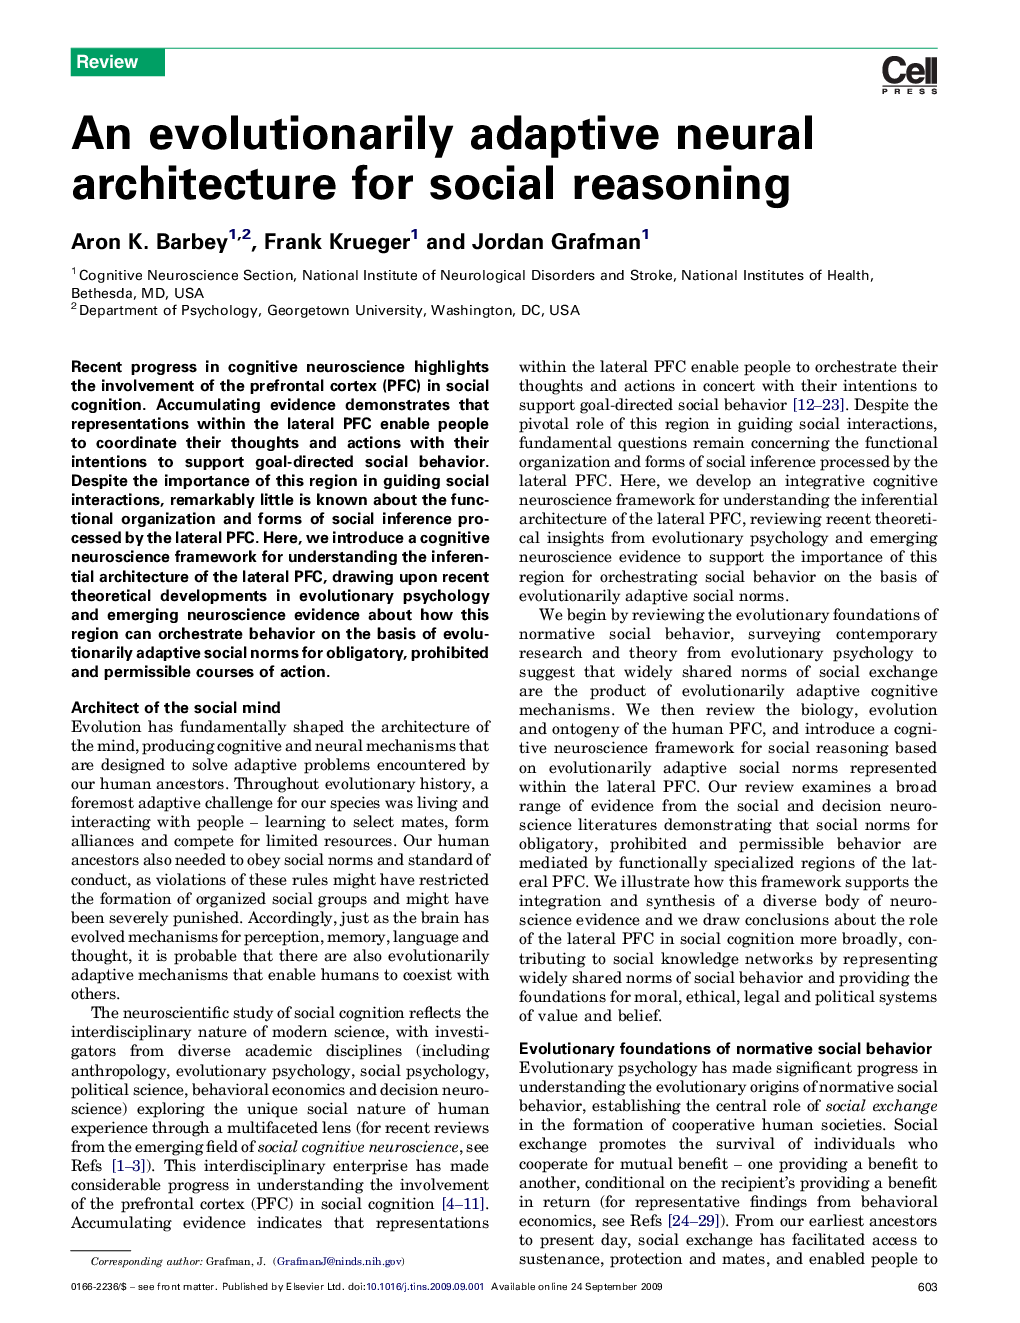 An evolutionarily adaptive neural architecture for social reasoning